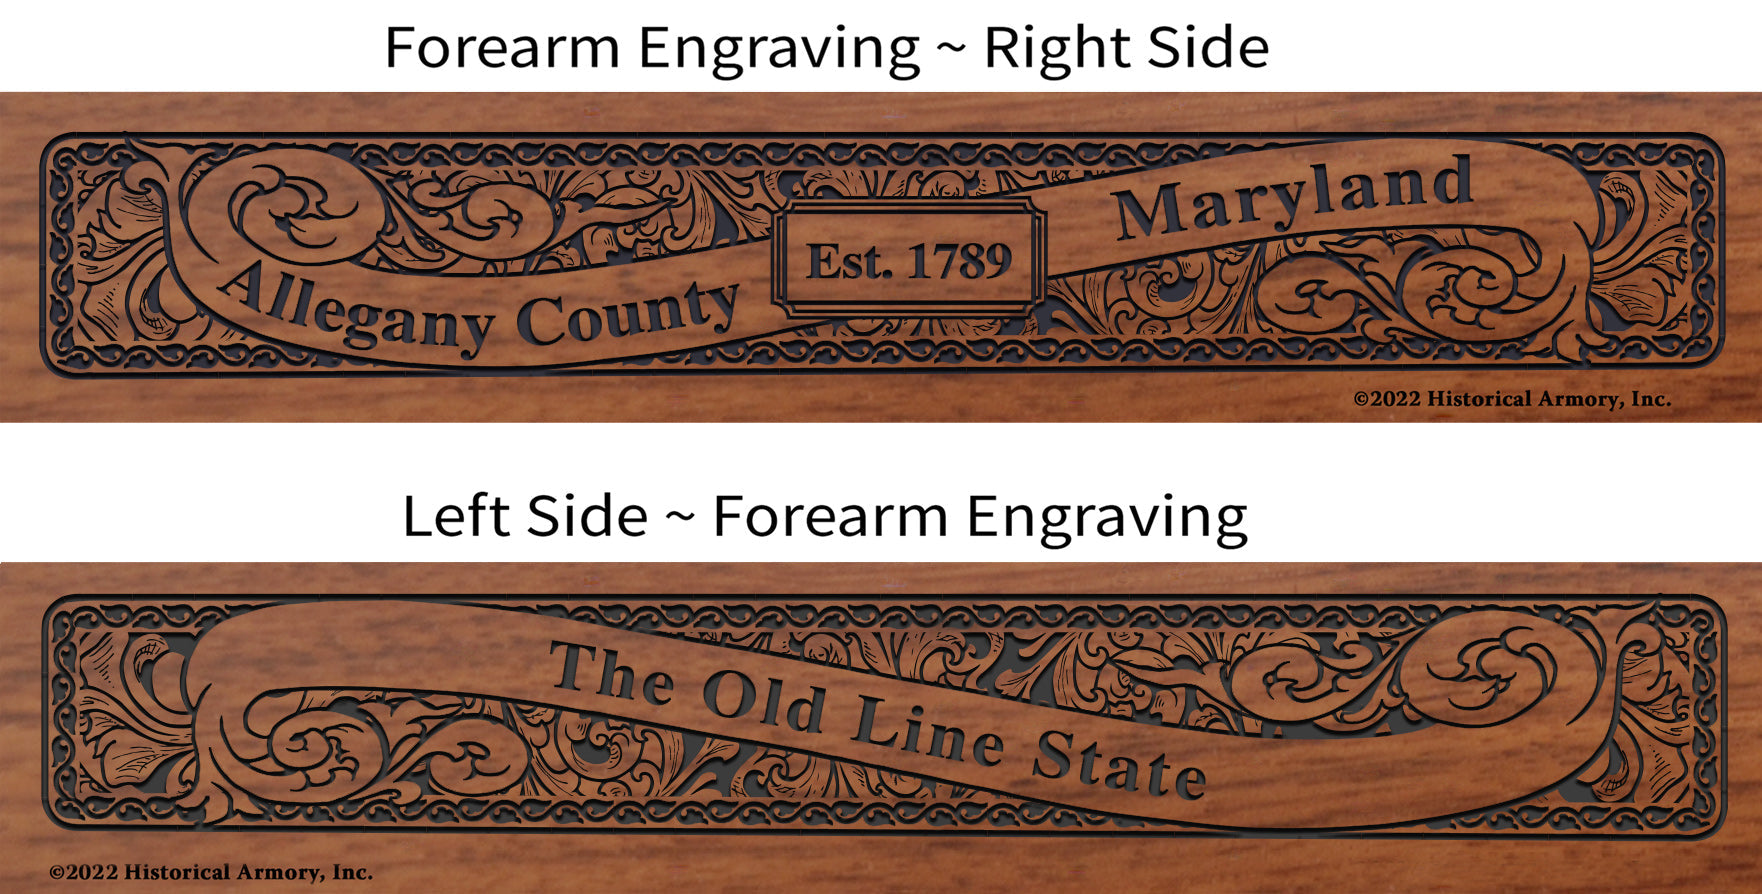 Allegany County Maryland Engraved Rifle Forearm